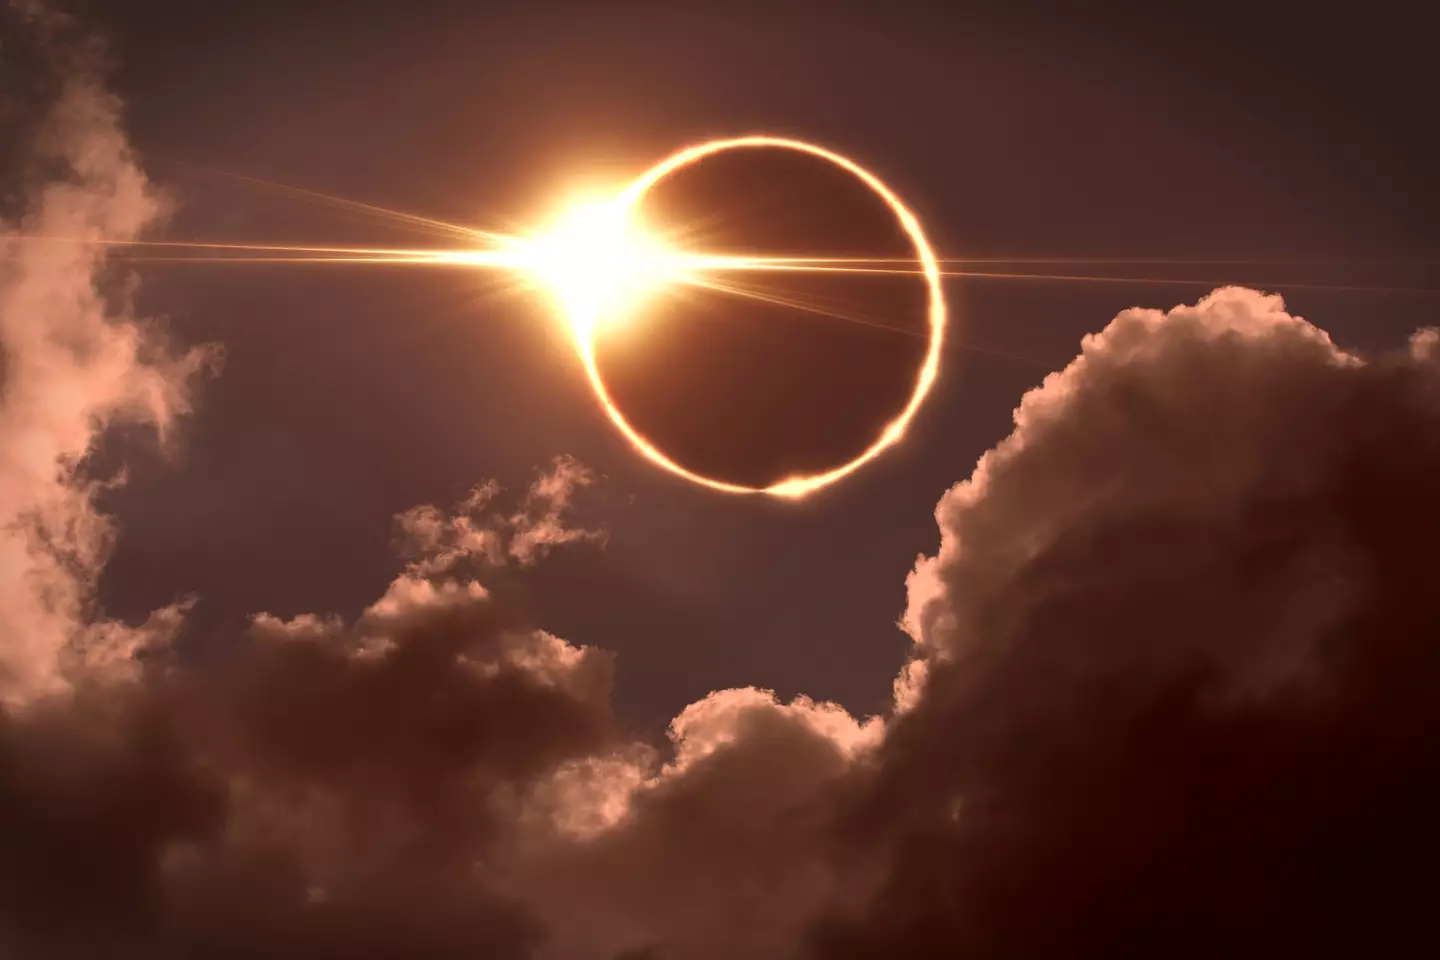 Many noticed something unusual with the solar eclipse. (Getty Stock Photo)